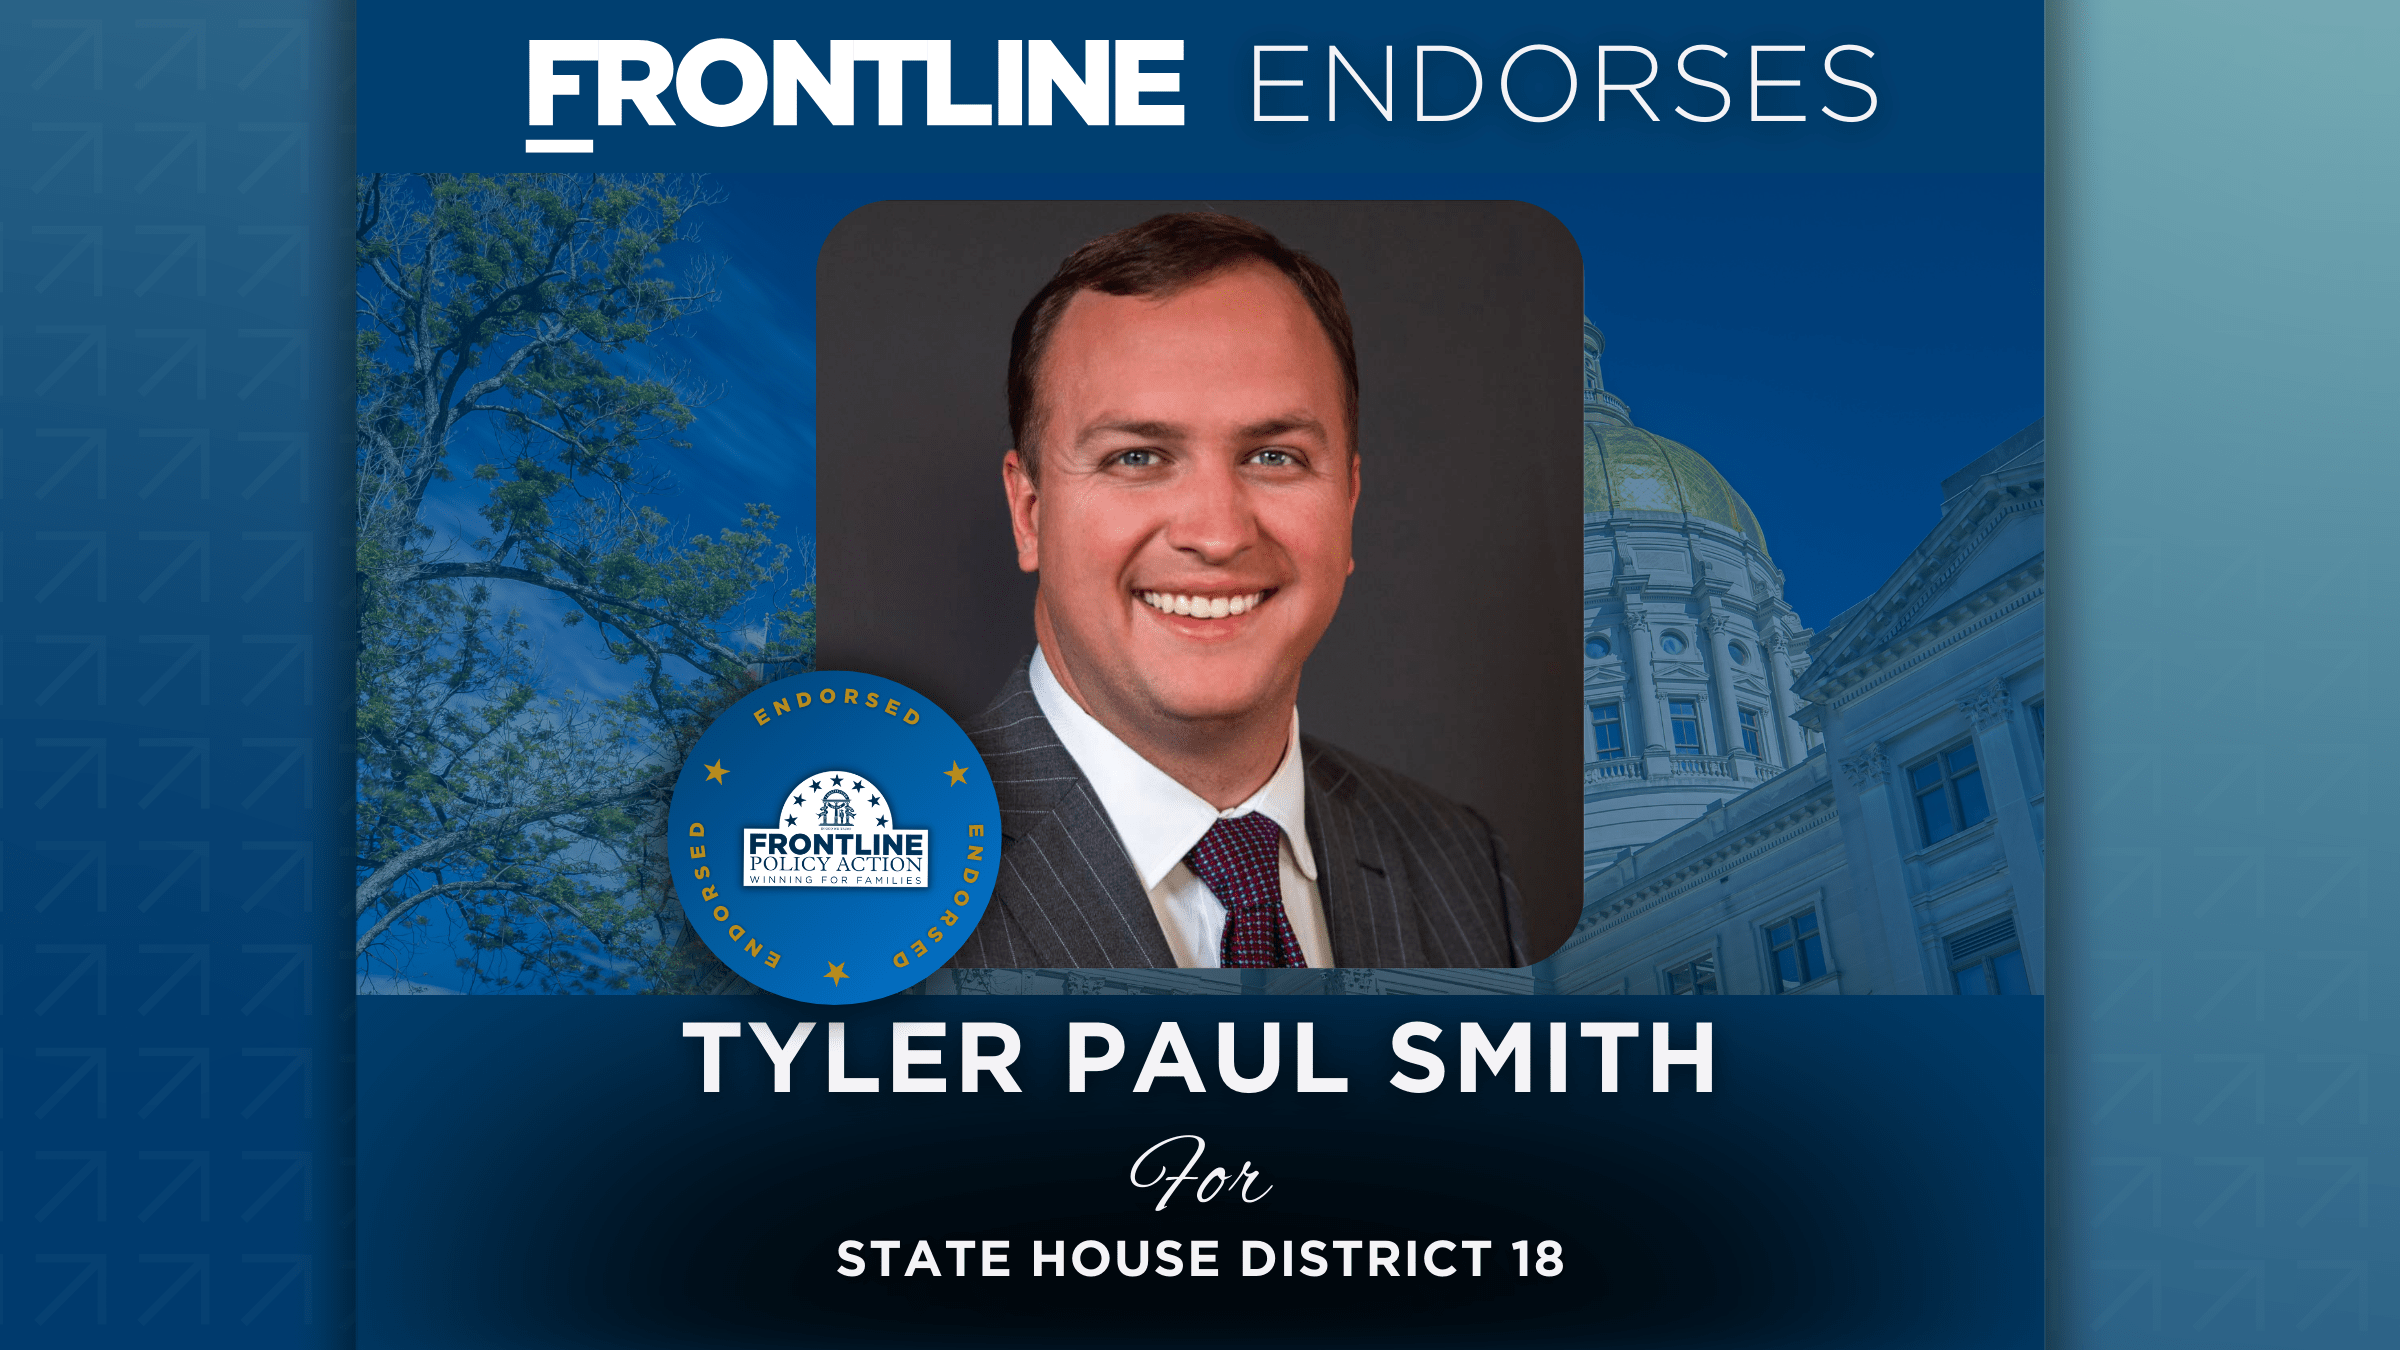 BREAKING: Frontline Endorses Tyler Paul Smith for State House District 18